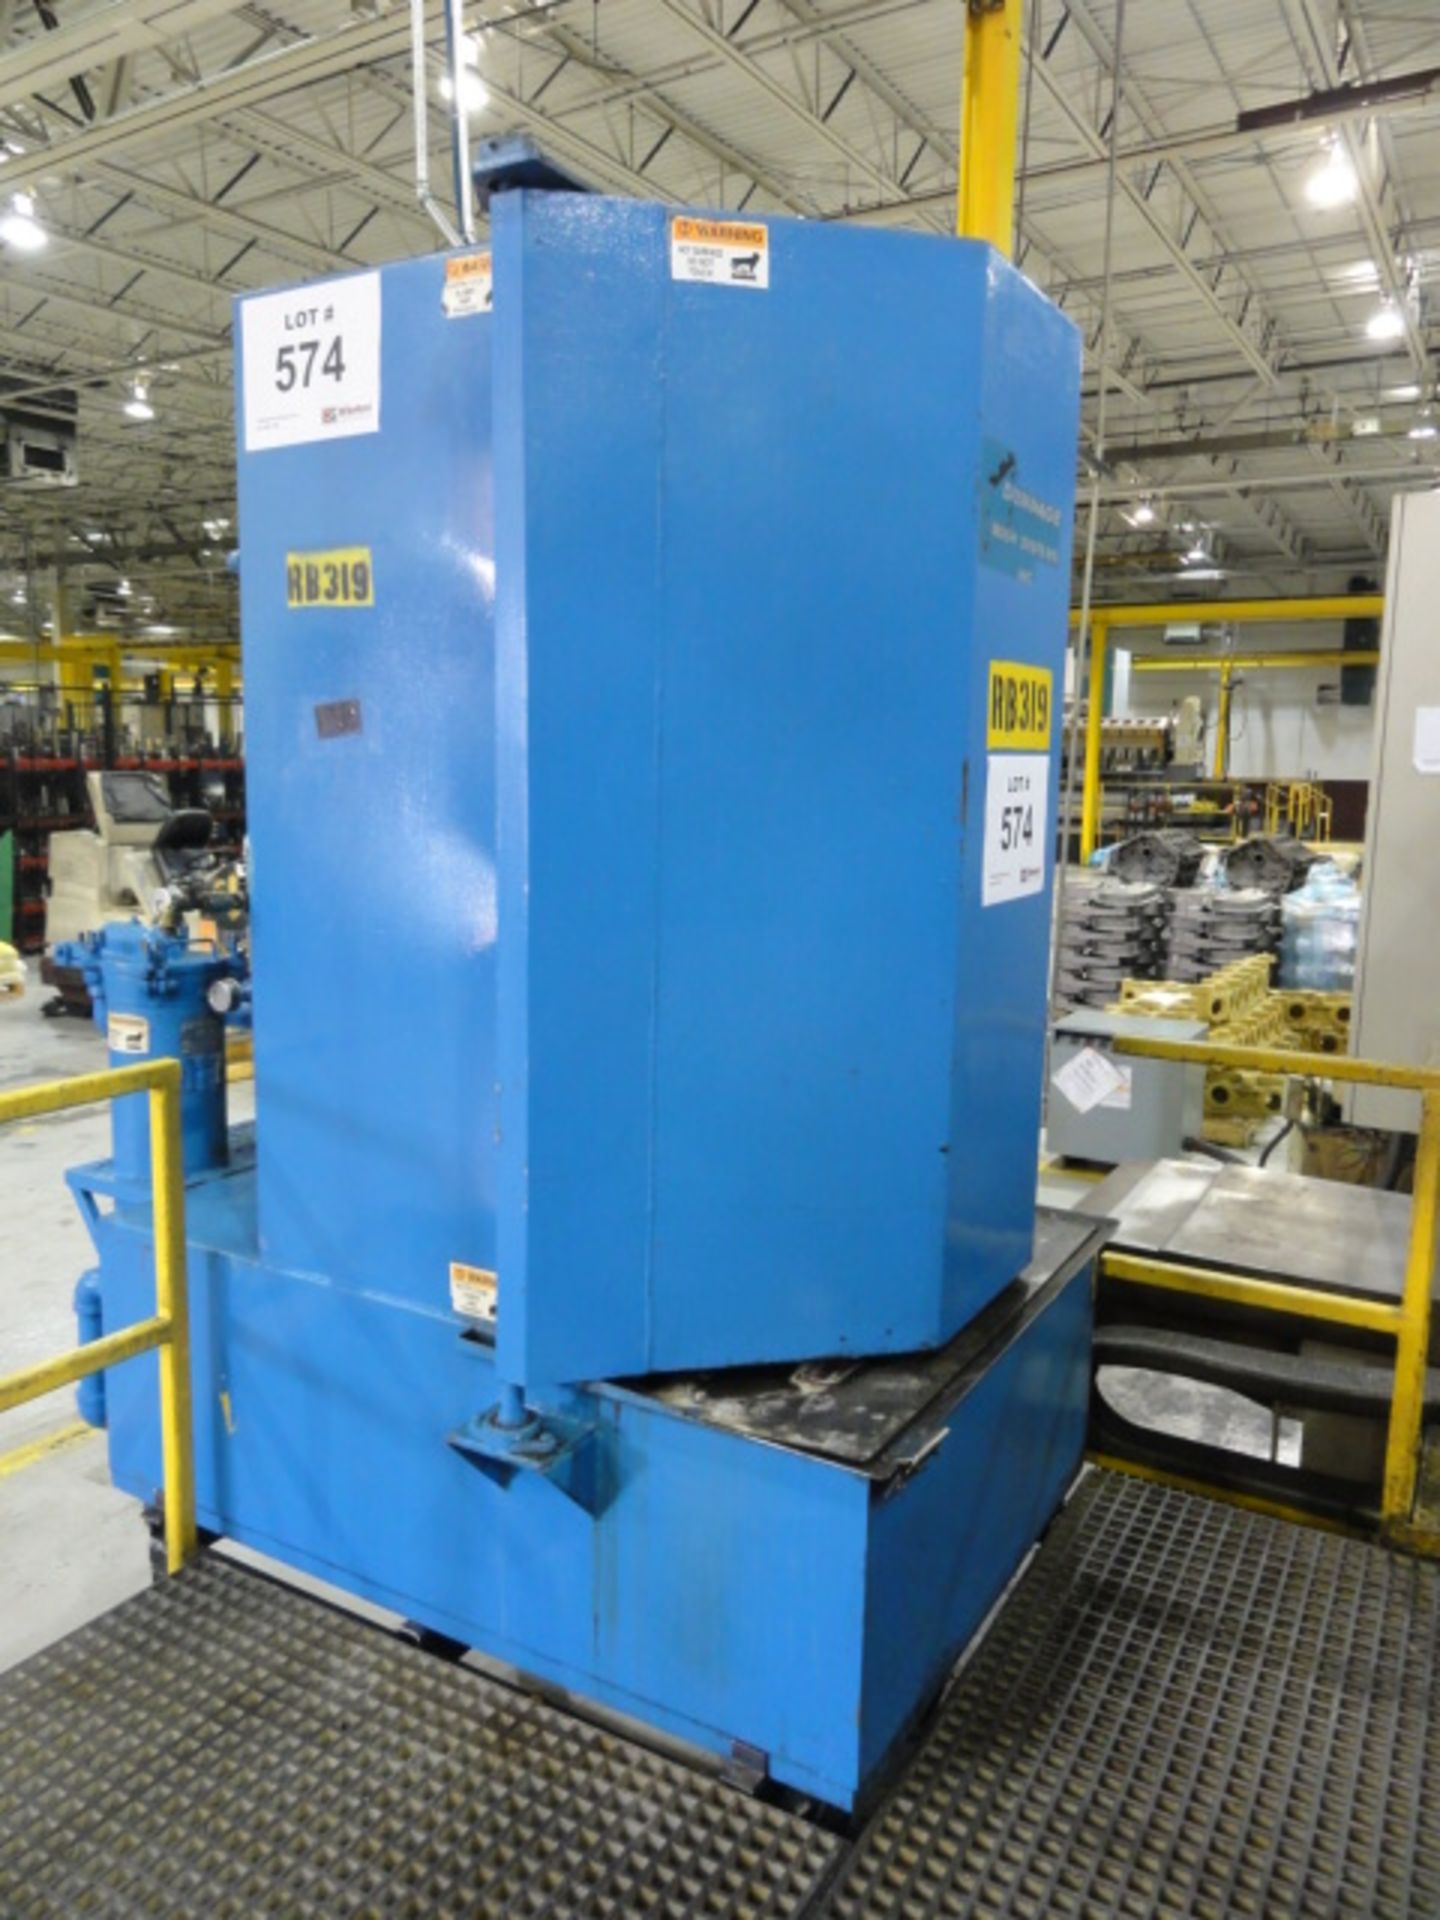 Dunnage Model FL-3648-EDB Single Door Industrial Carousel Washer w/ Heater and Drying Sytems, - Image 3 of 8